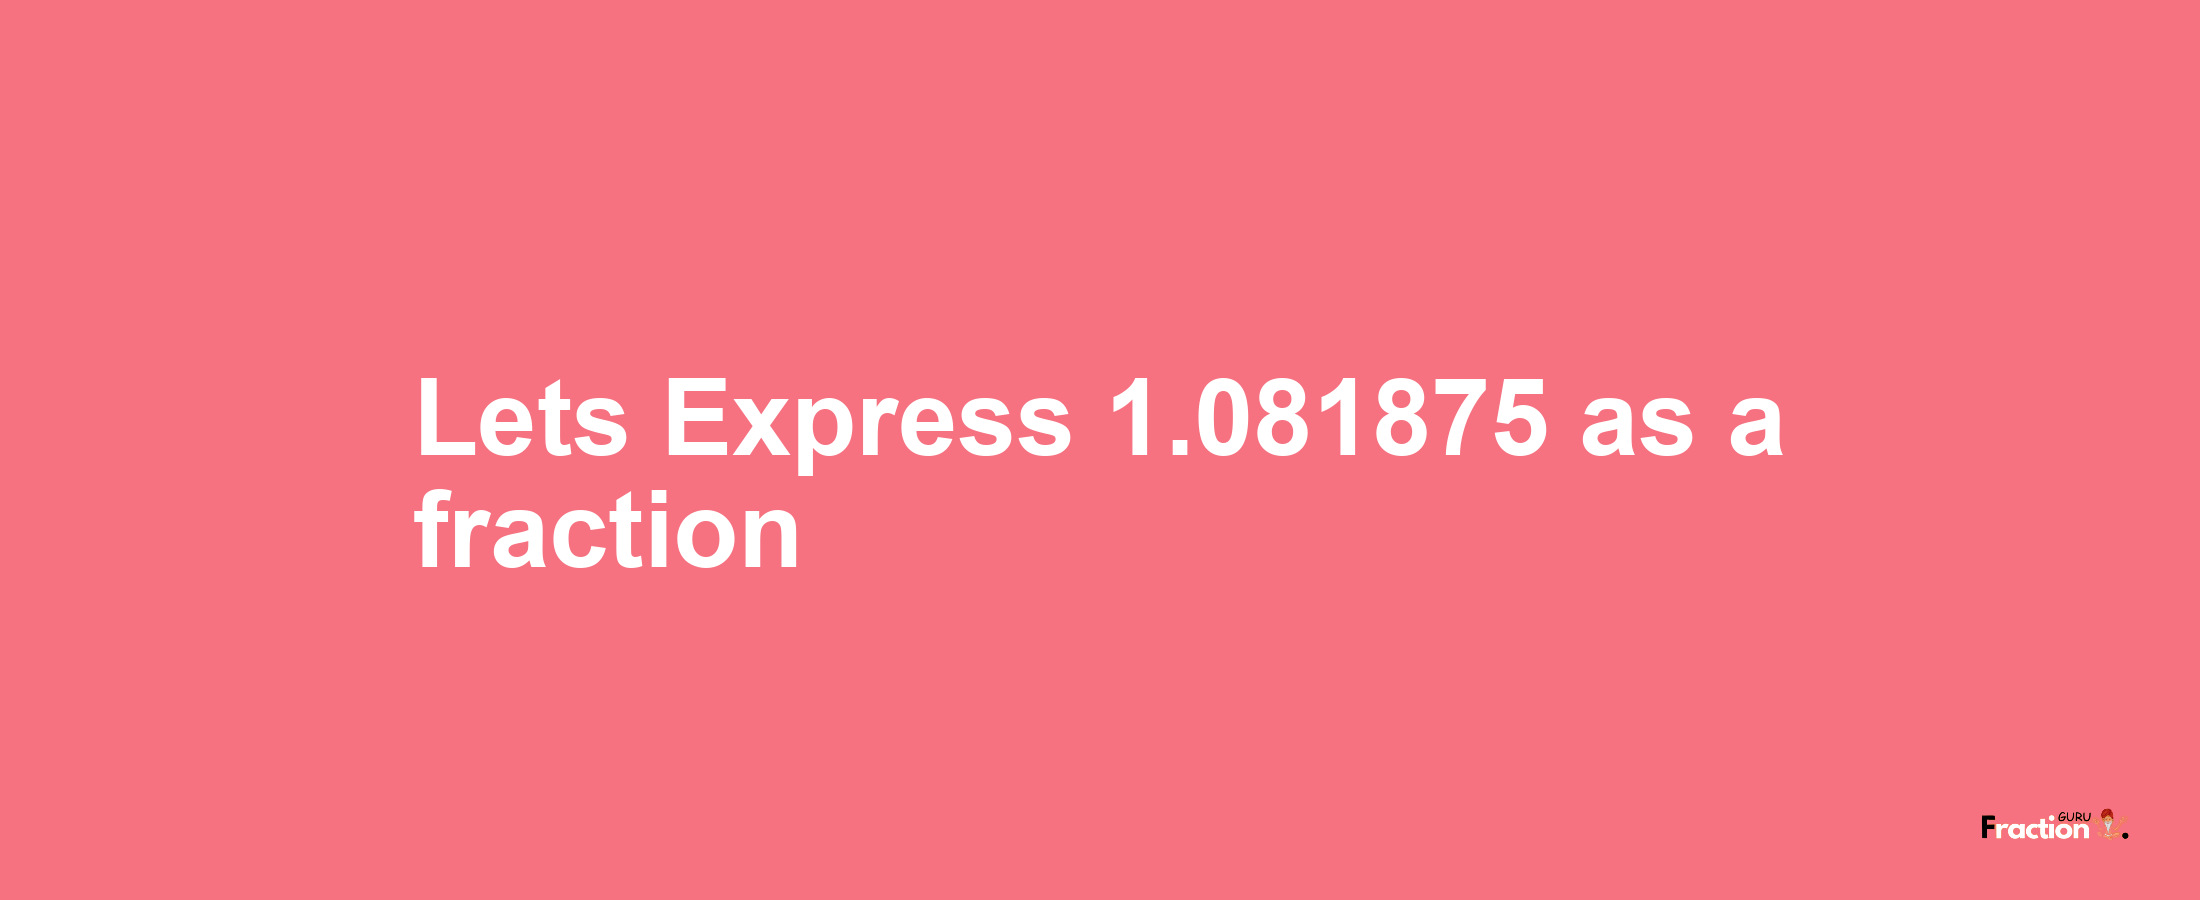 Lets Express 1.081875 as afraction